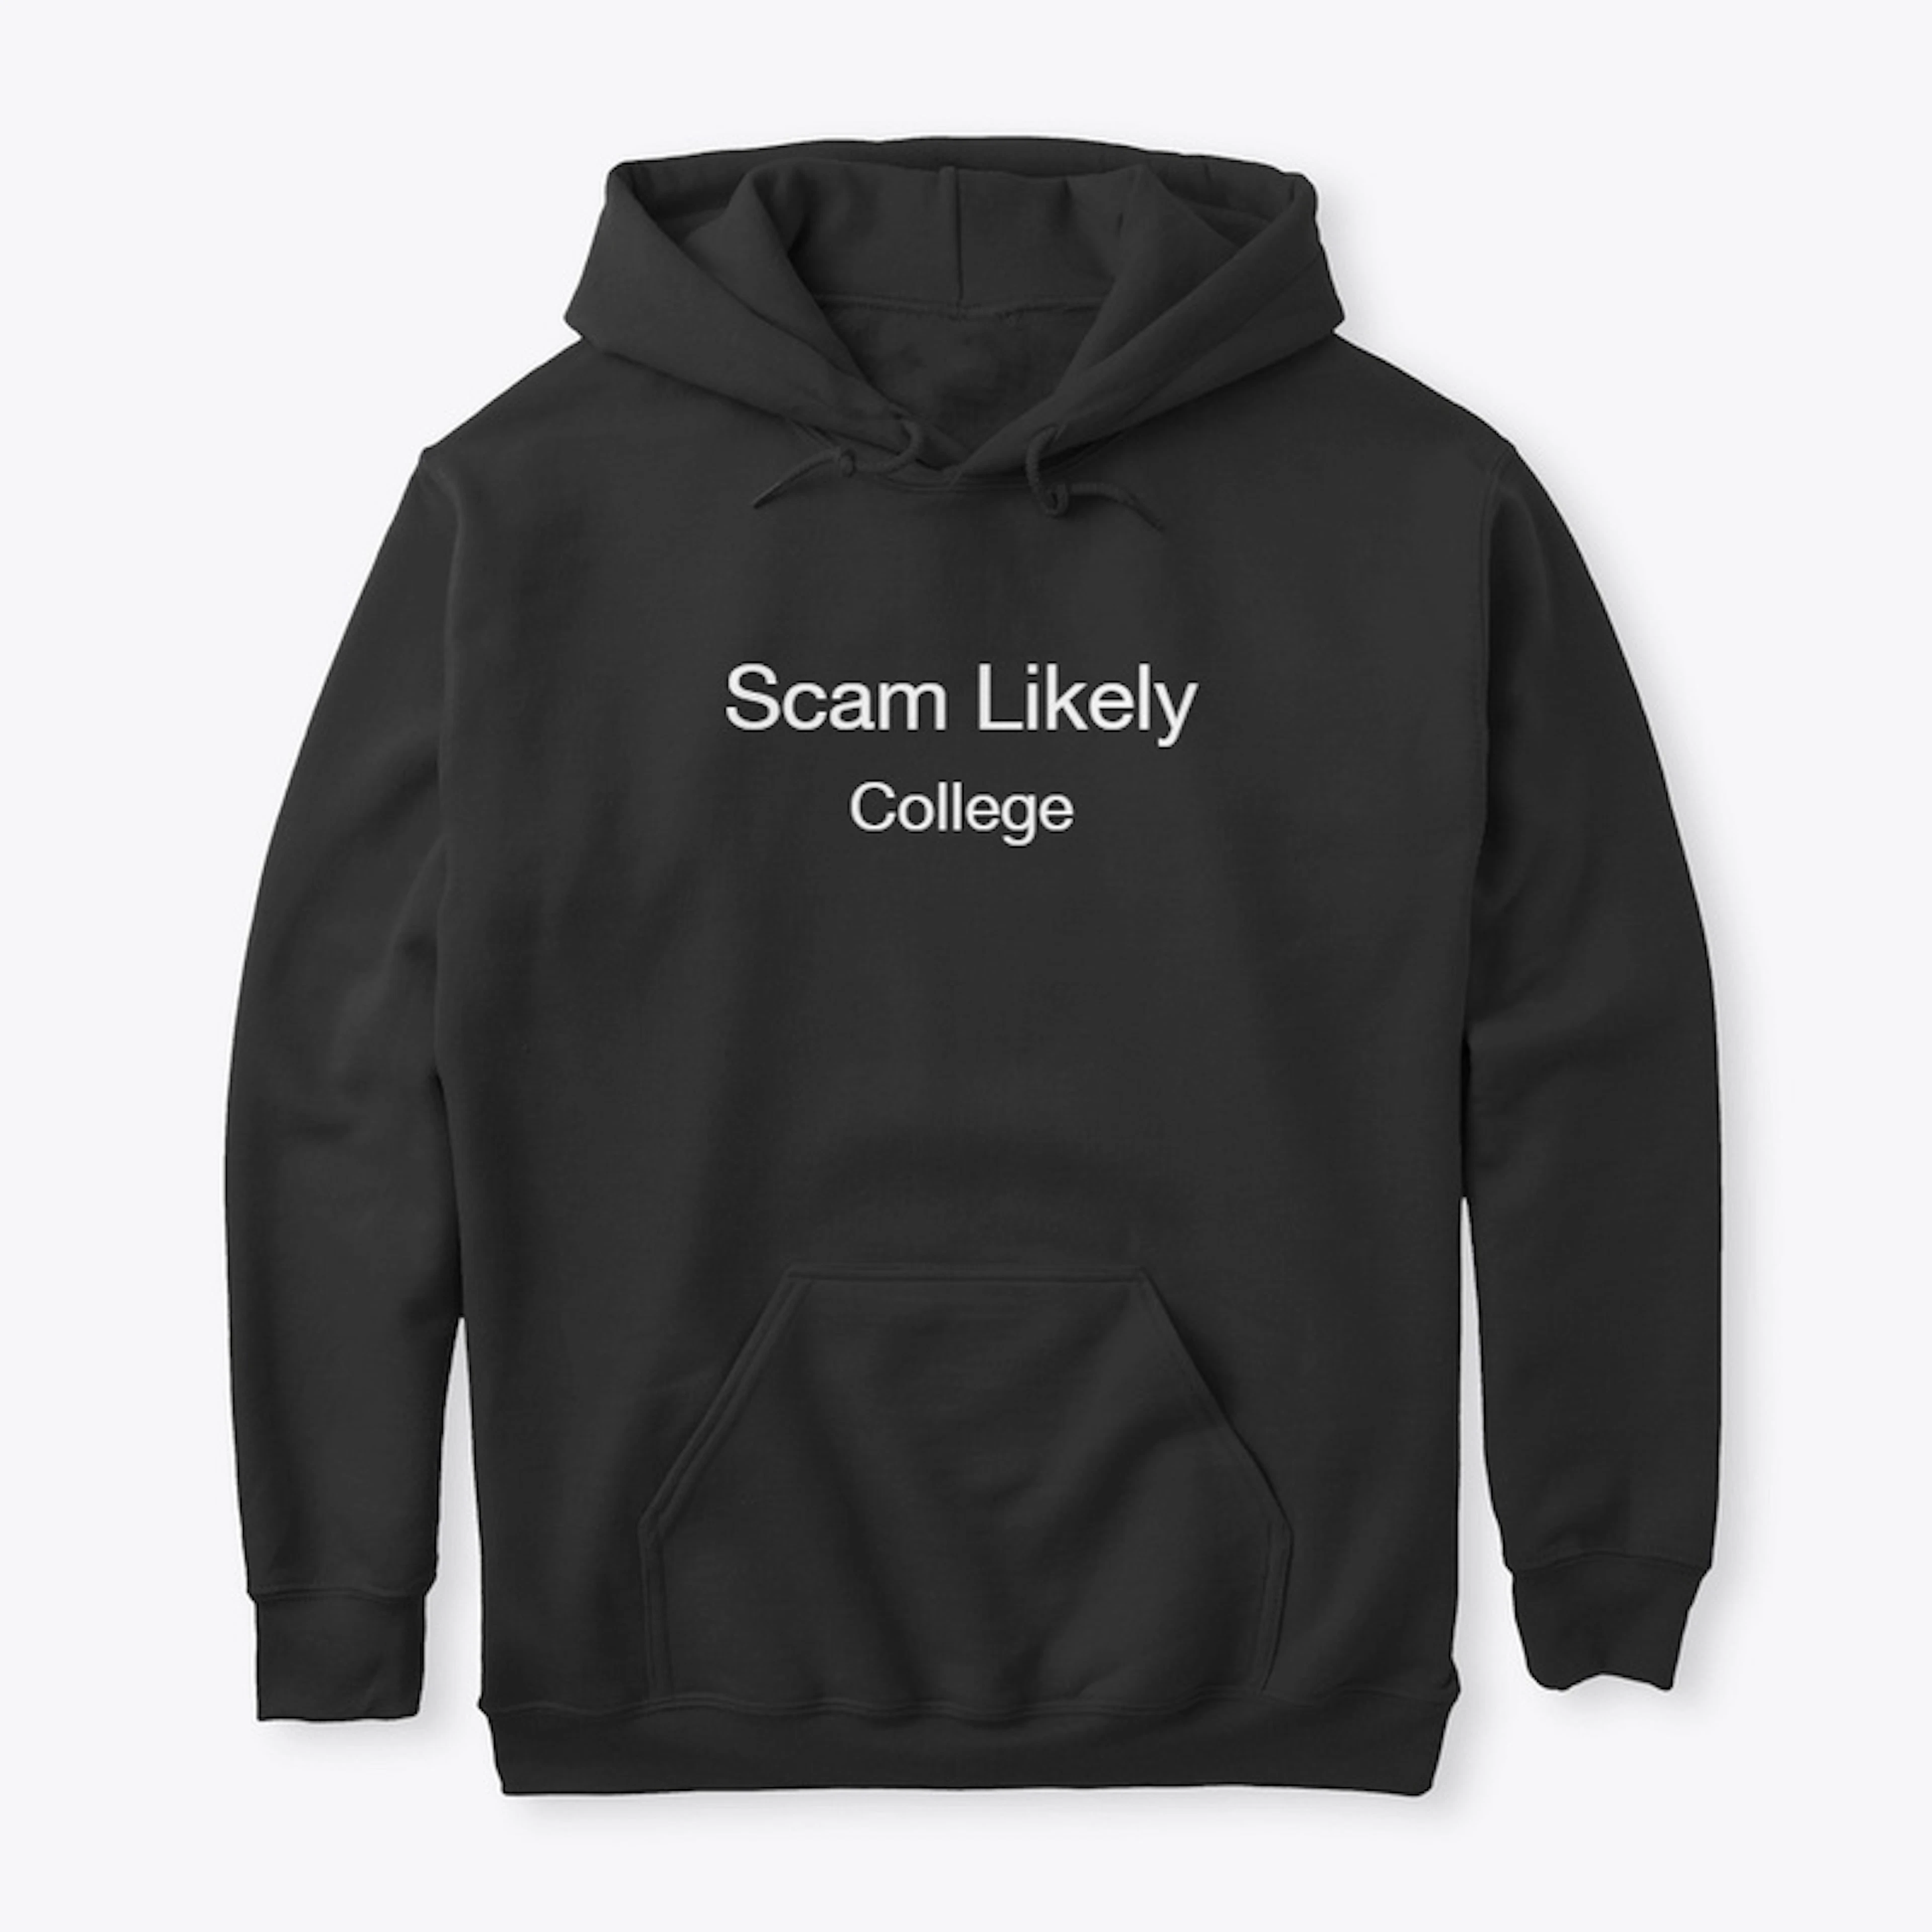 Scam Likely, College